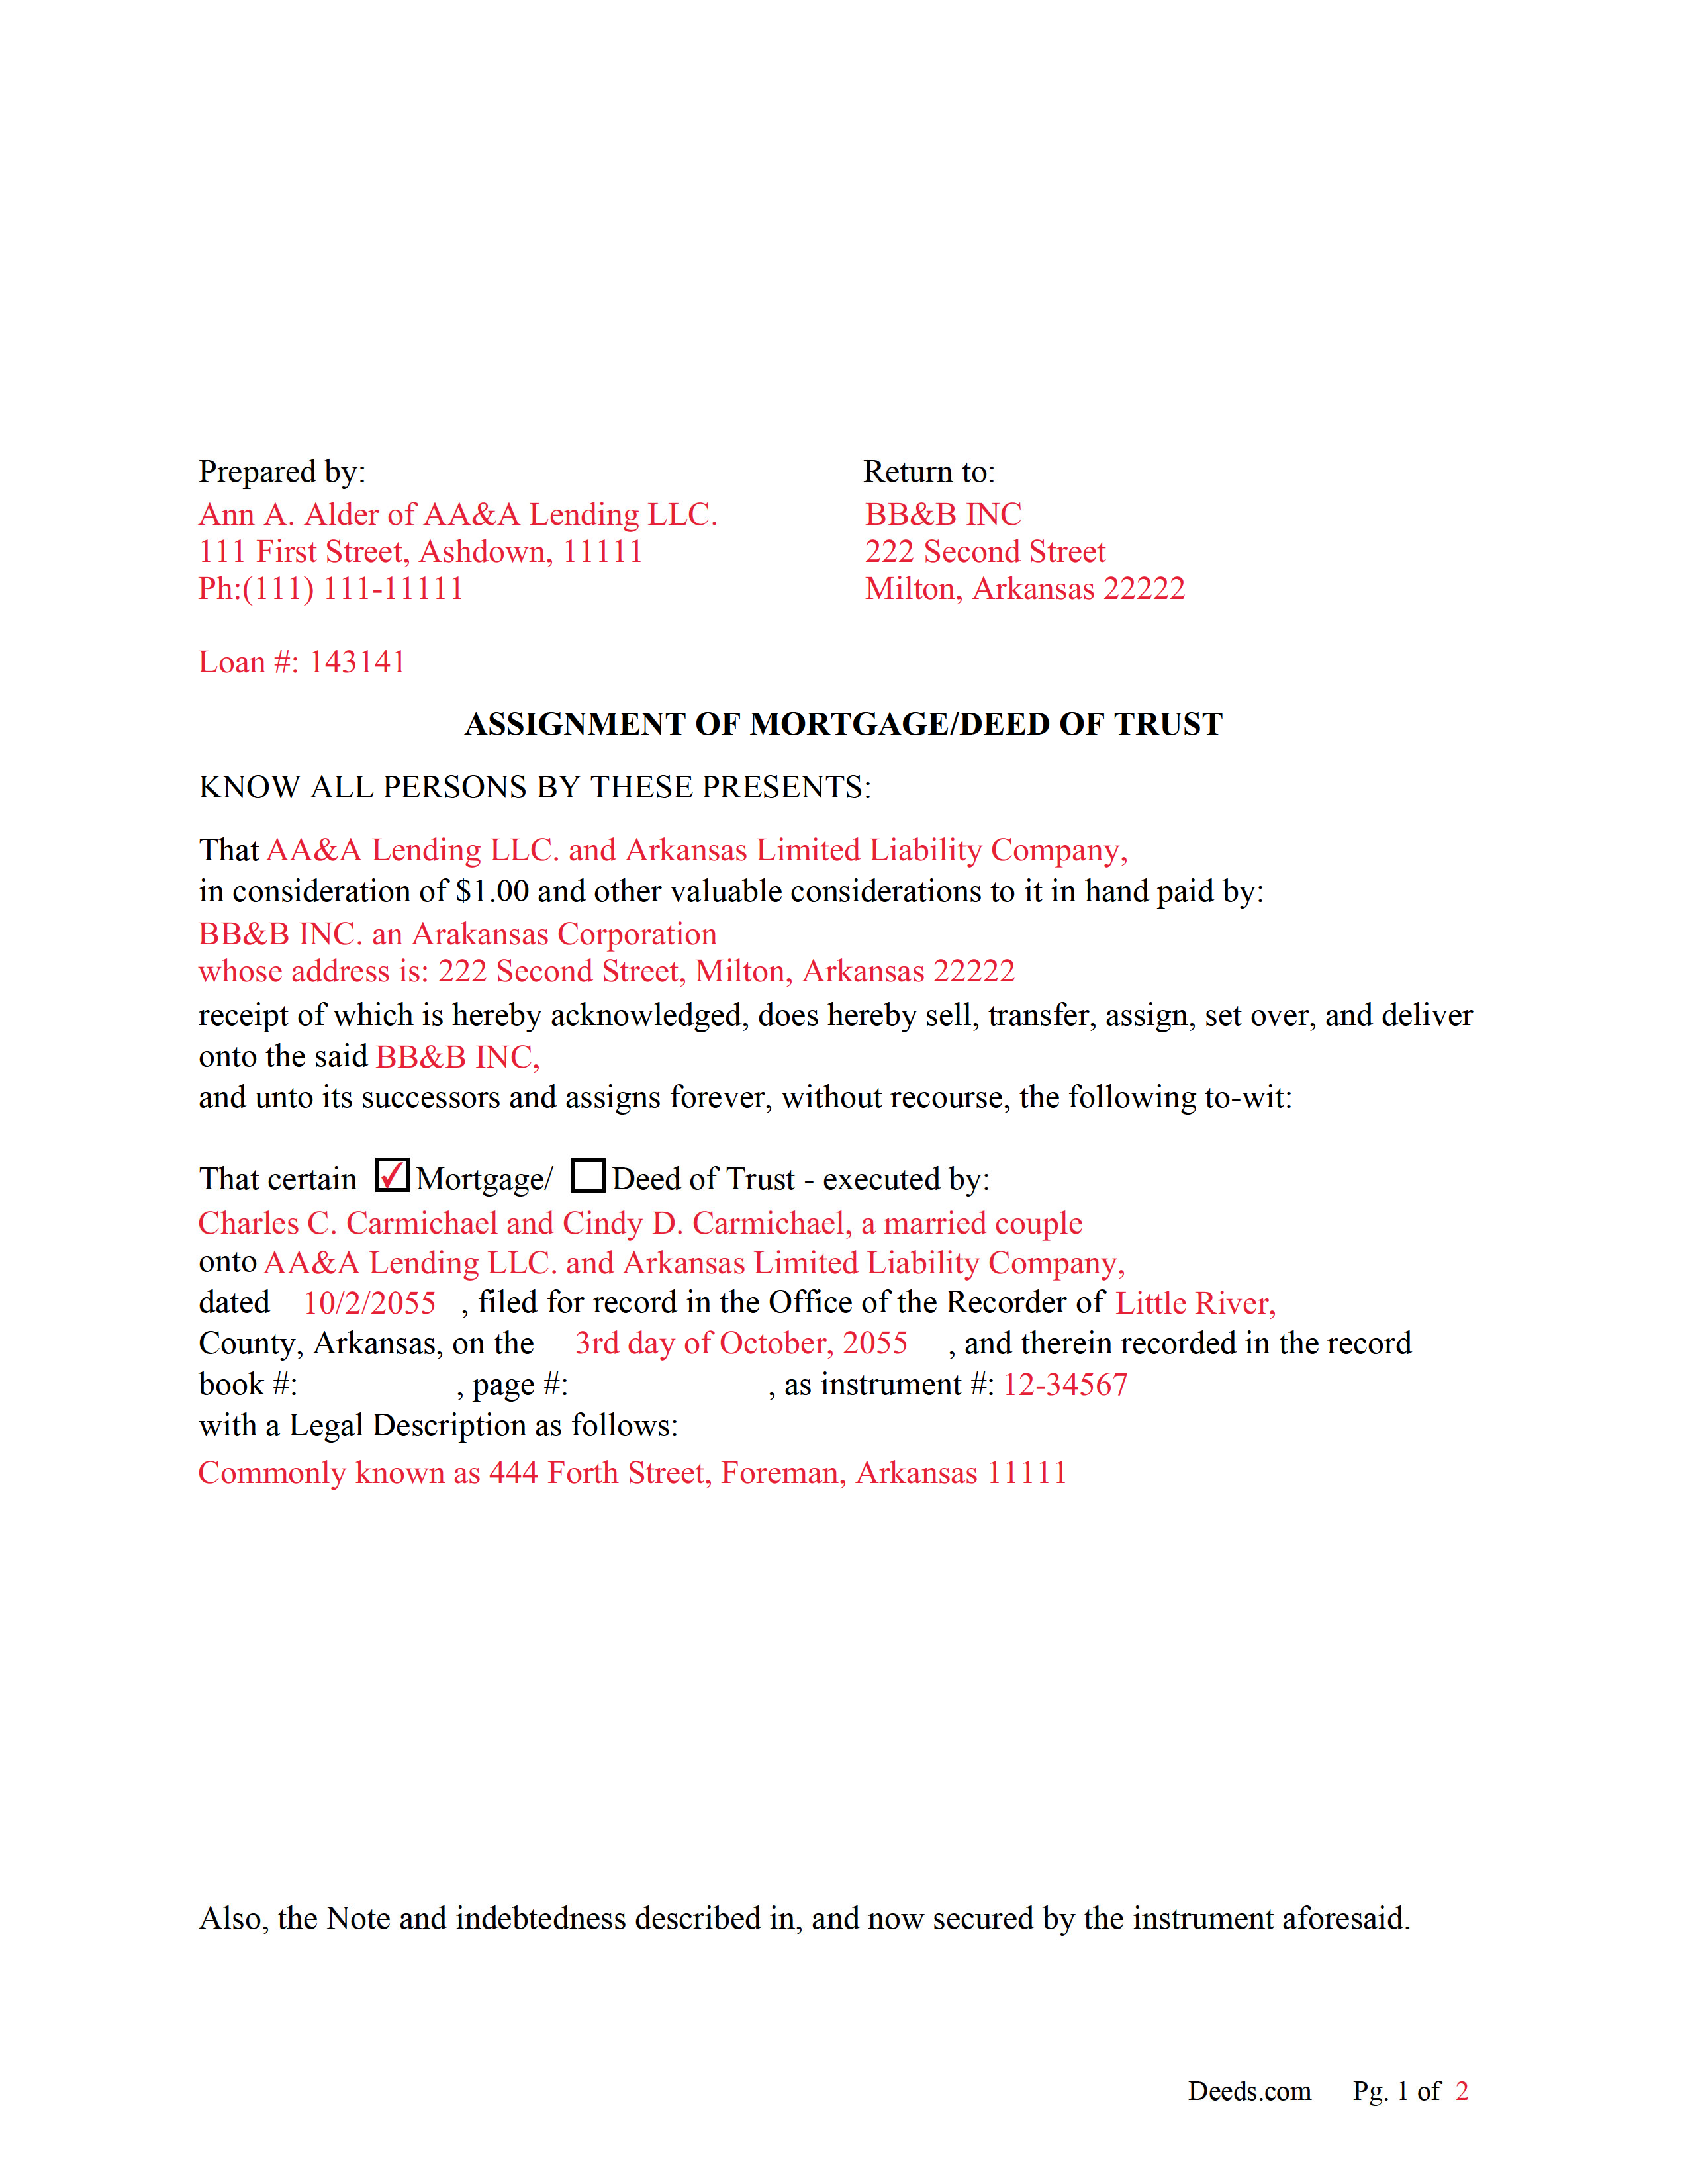 Completed Example of an Assignment Document